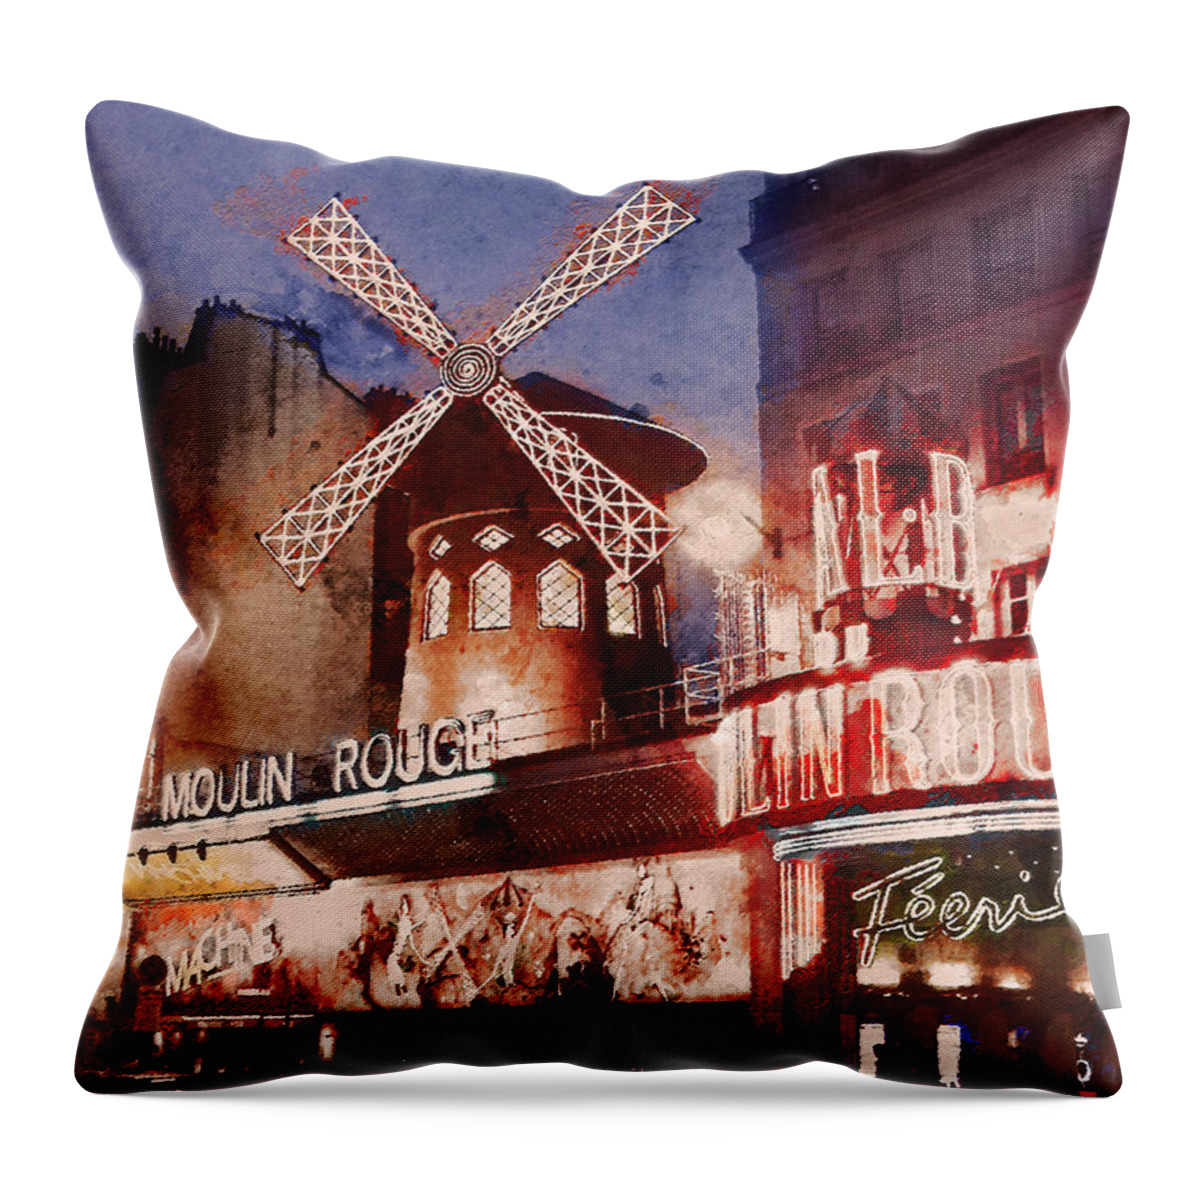 Moulin Rouge Throw Pillow featuring the painting Paris. Moulin Rouge. by Alex Mir